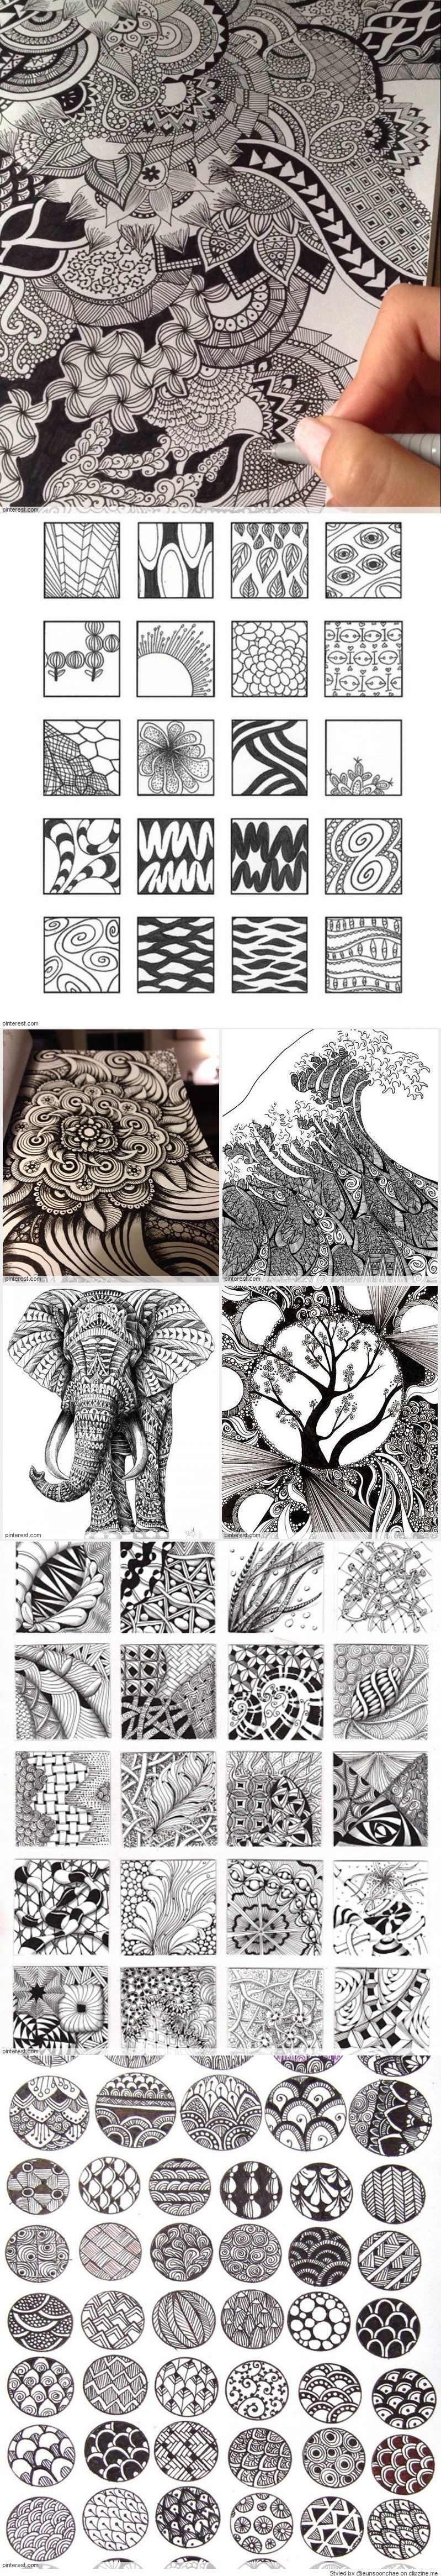 Zentangle Patterns & Ideas I did not realize all the patterns had names!!